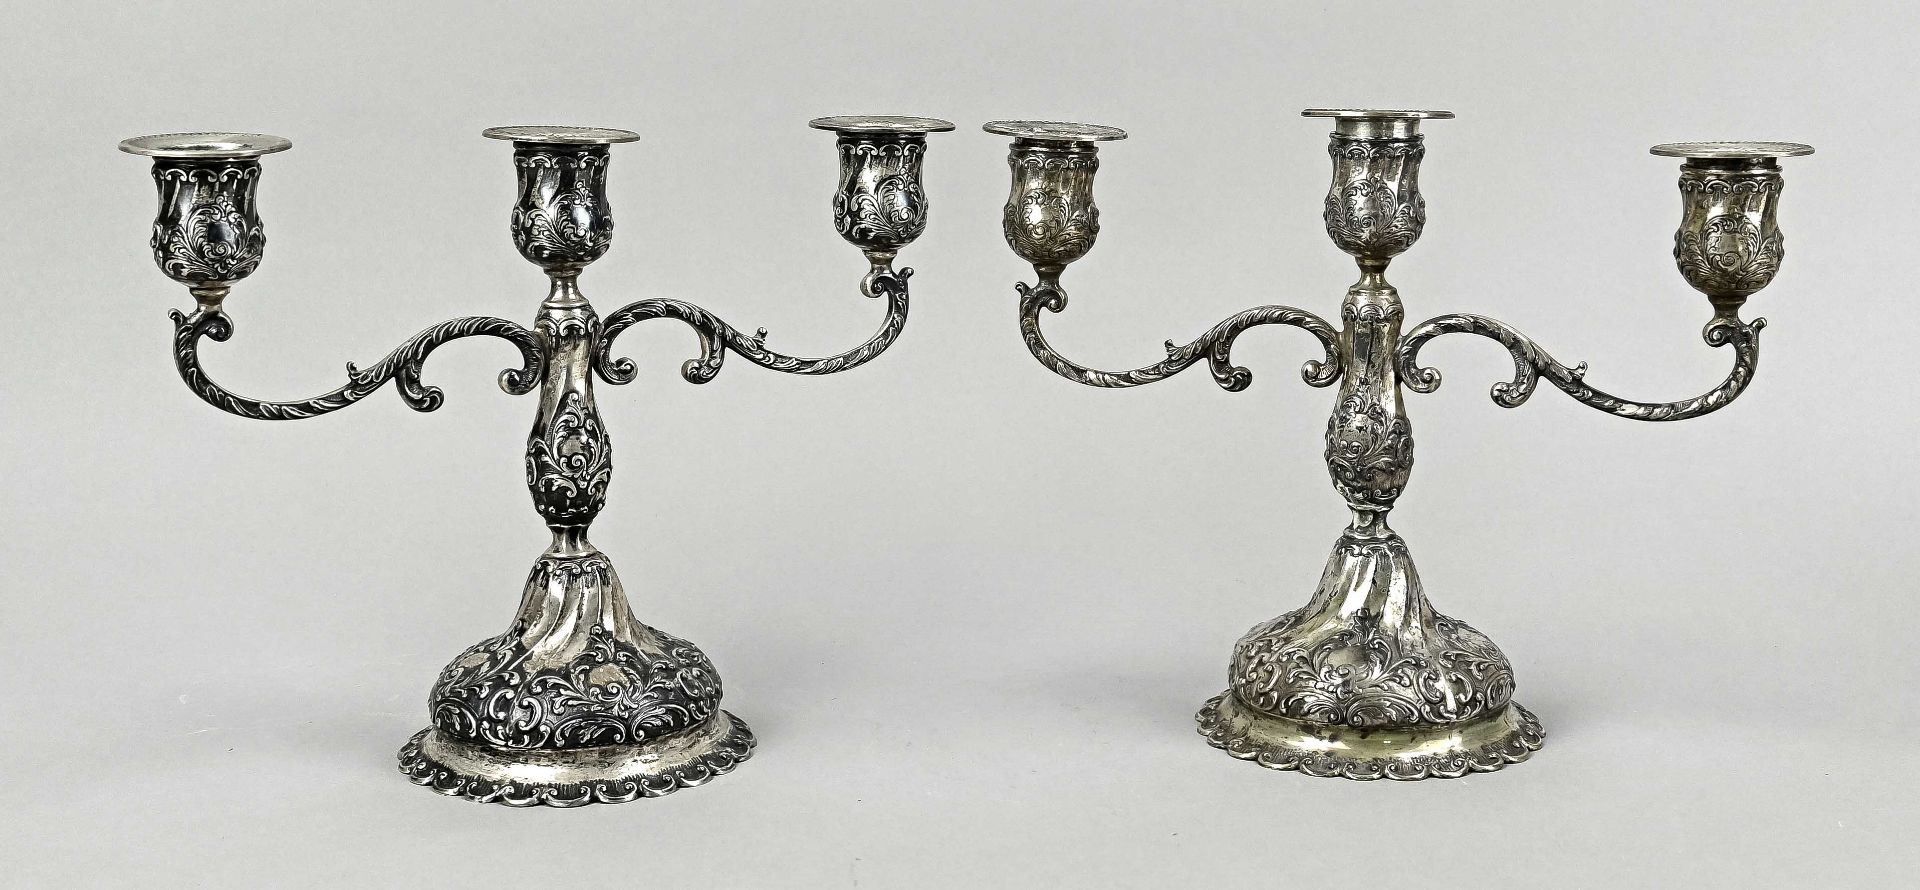 Pair of candlesticks, silver 800, 3-lights each, roccaille, grommets added later, all hallmarked wi - Image 2 of 3